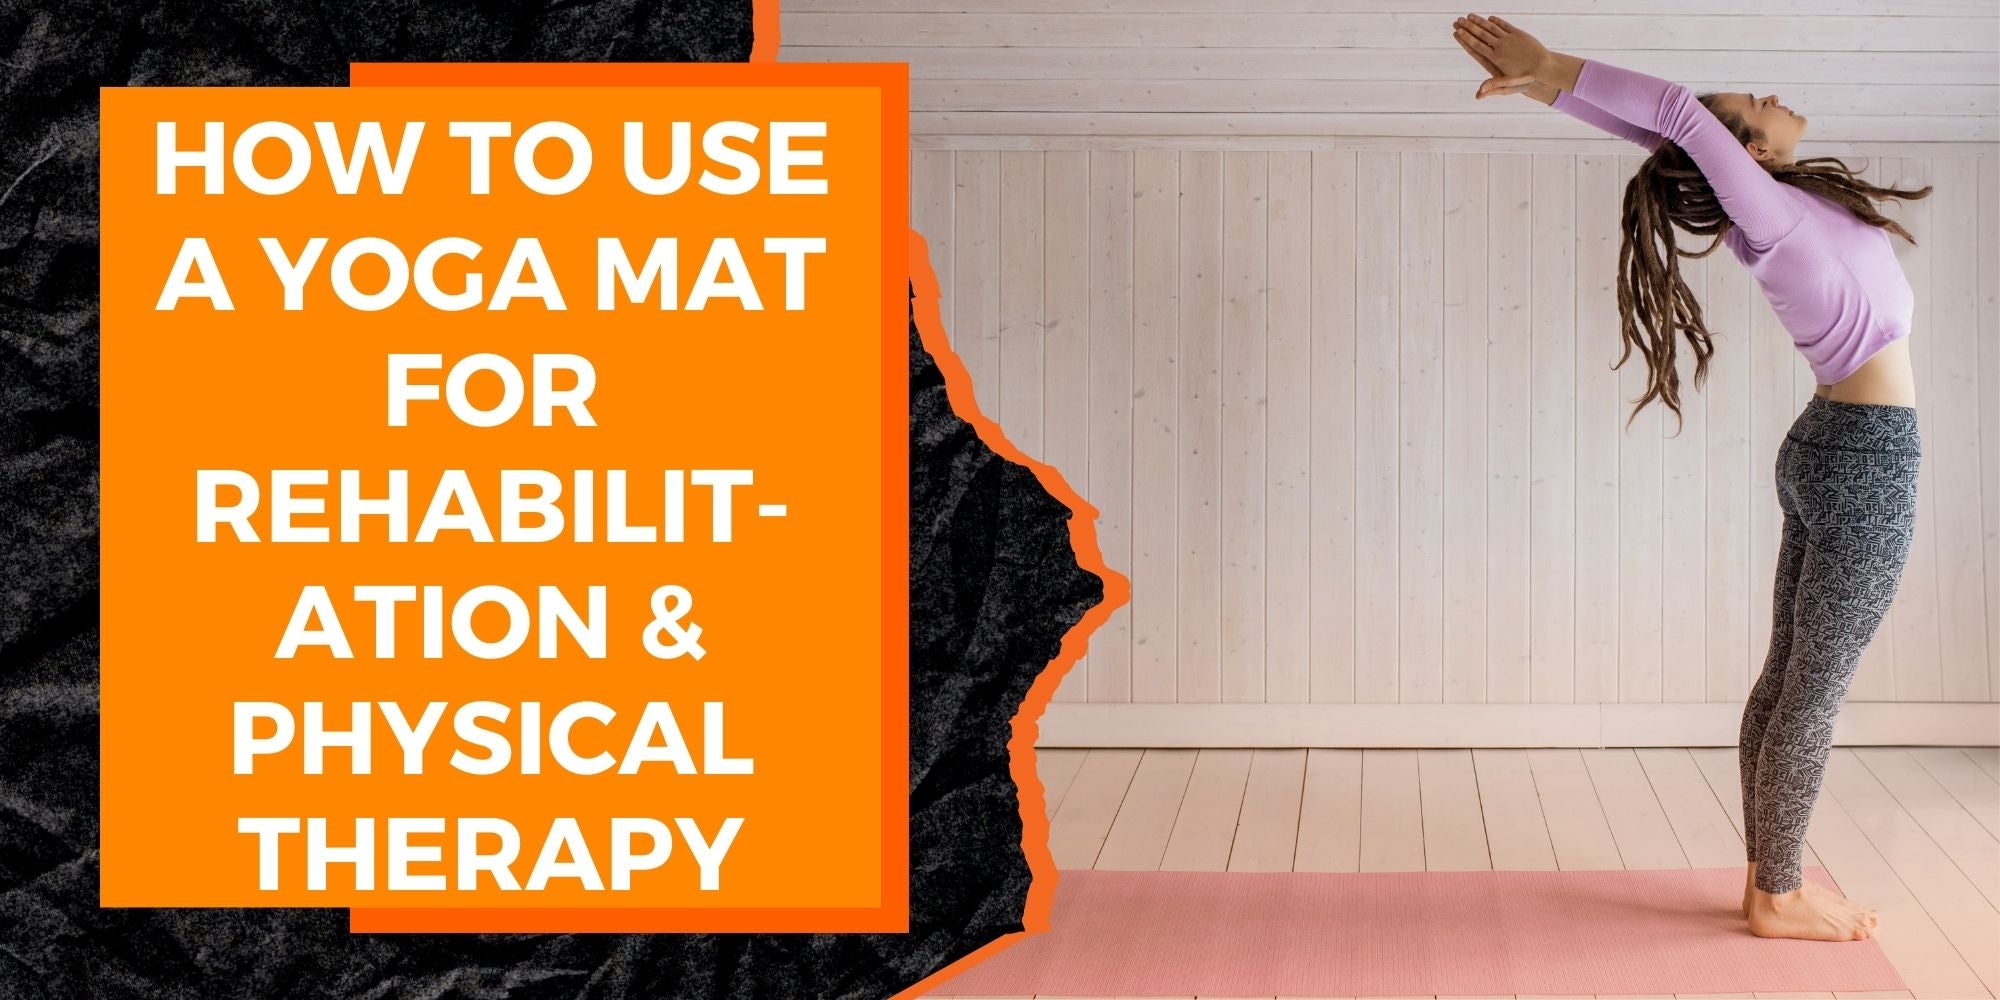 How to Use a Yoga Mat for Rehabilitation and Physical Therapy